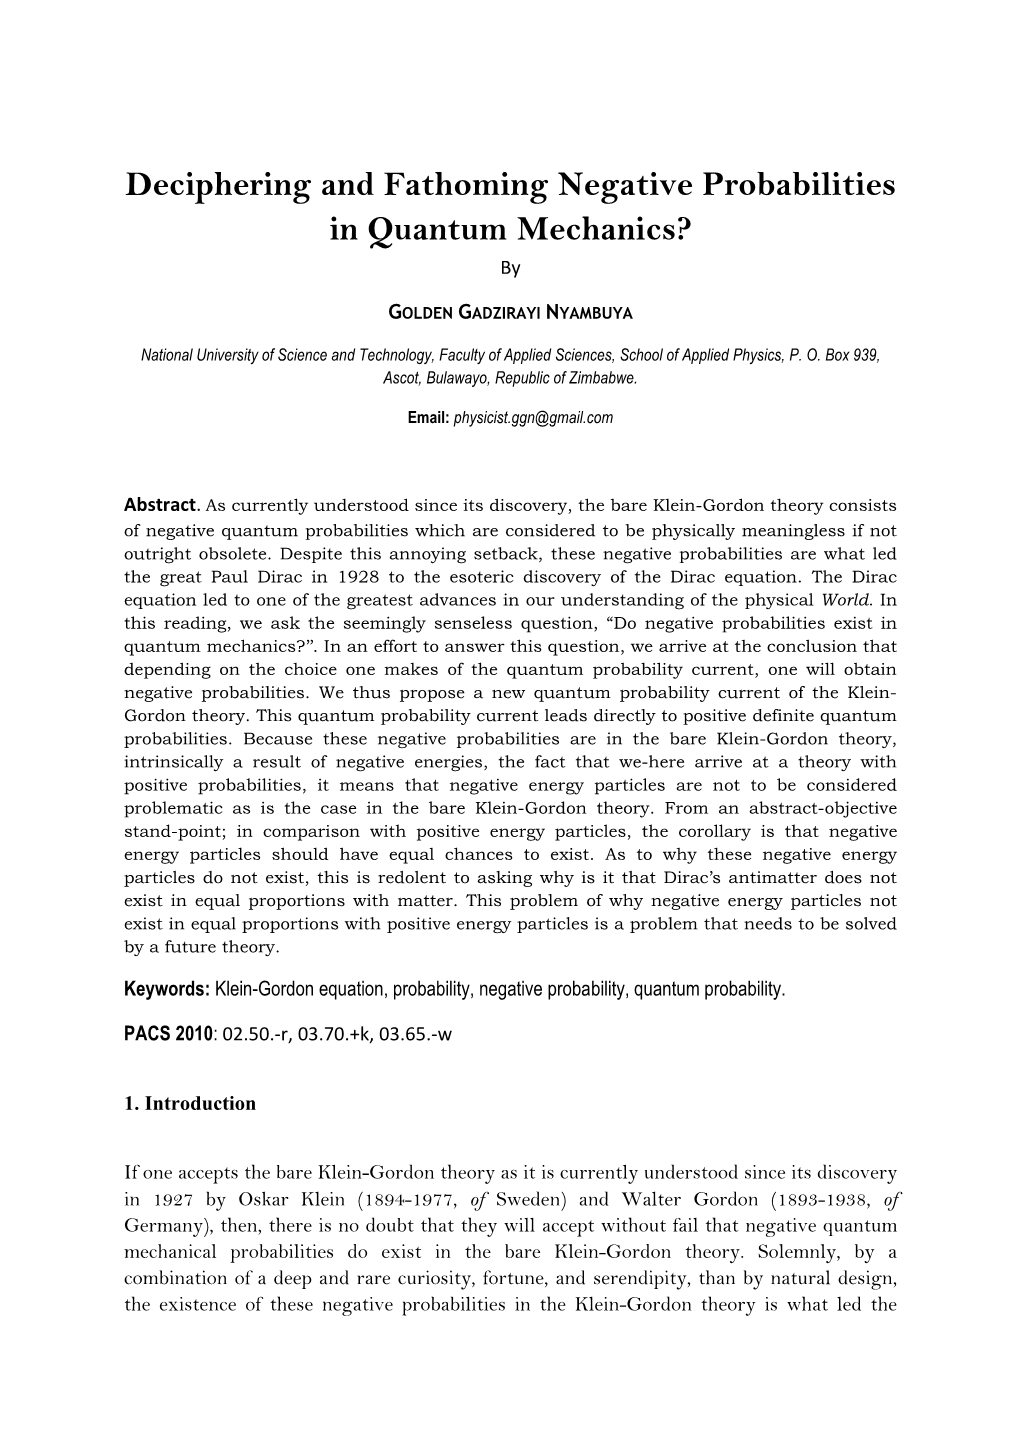 Deciphering and Fathoming Negative Probabilities in Quantum Mechanics? By